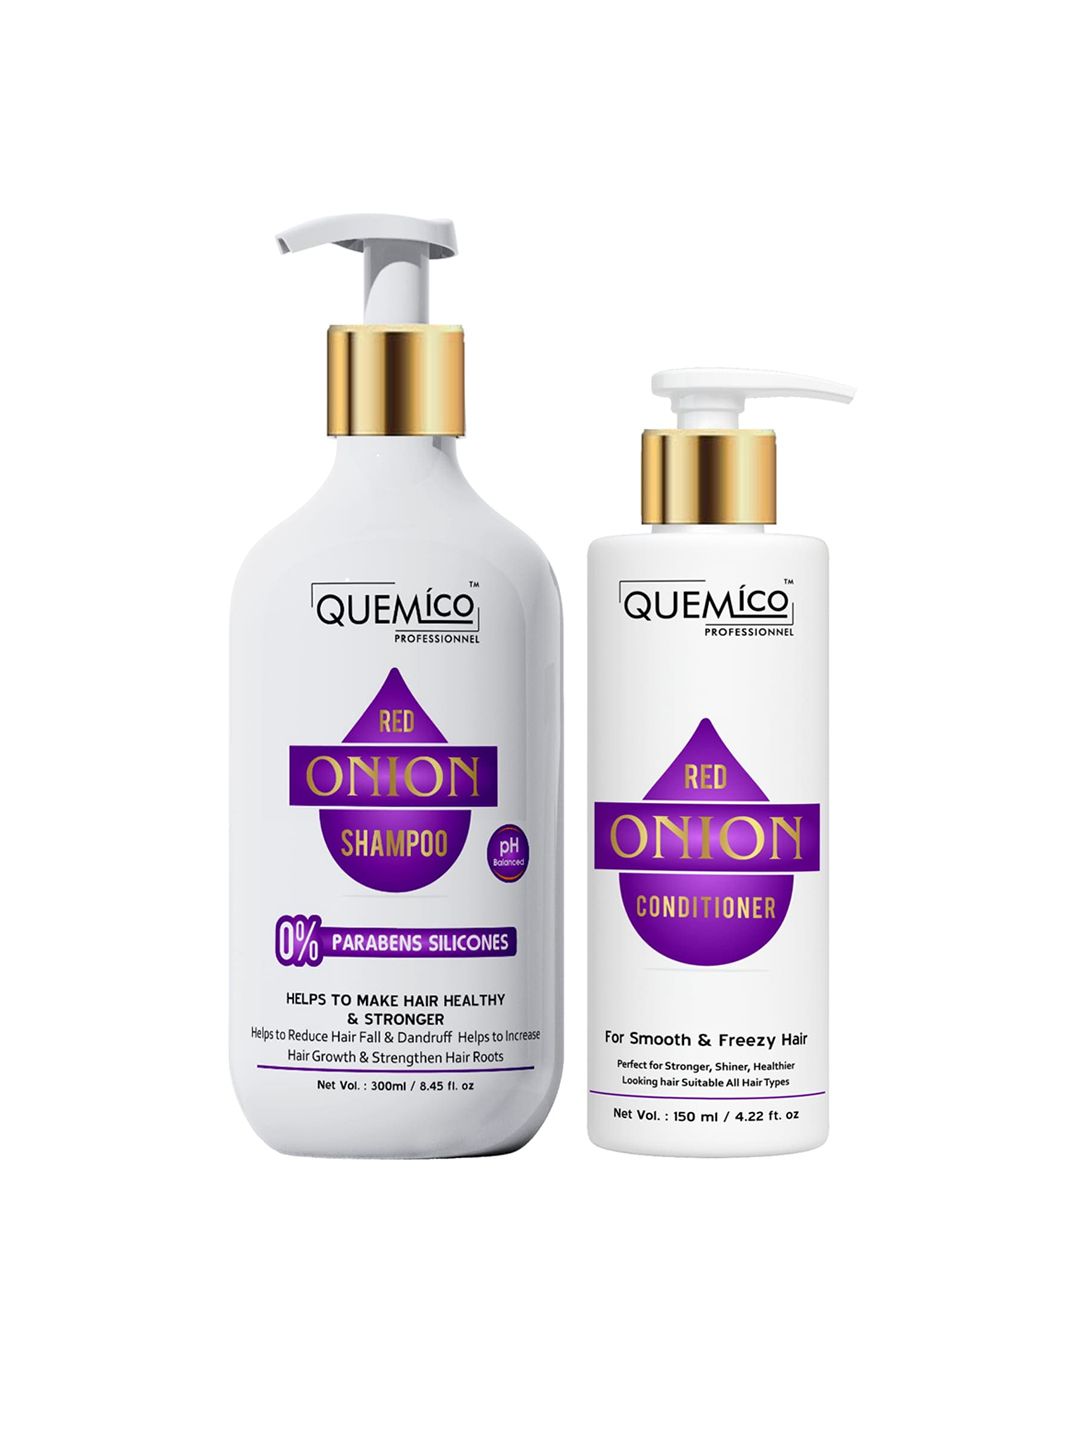 Quemico Professionnel Red Onion Hair Care Kit - 300ml Price in India